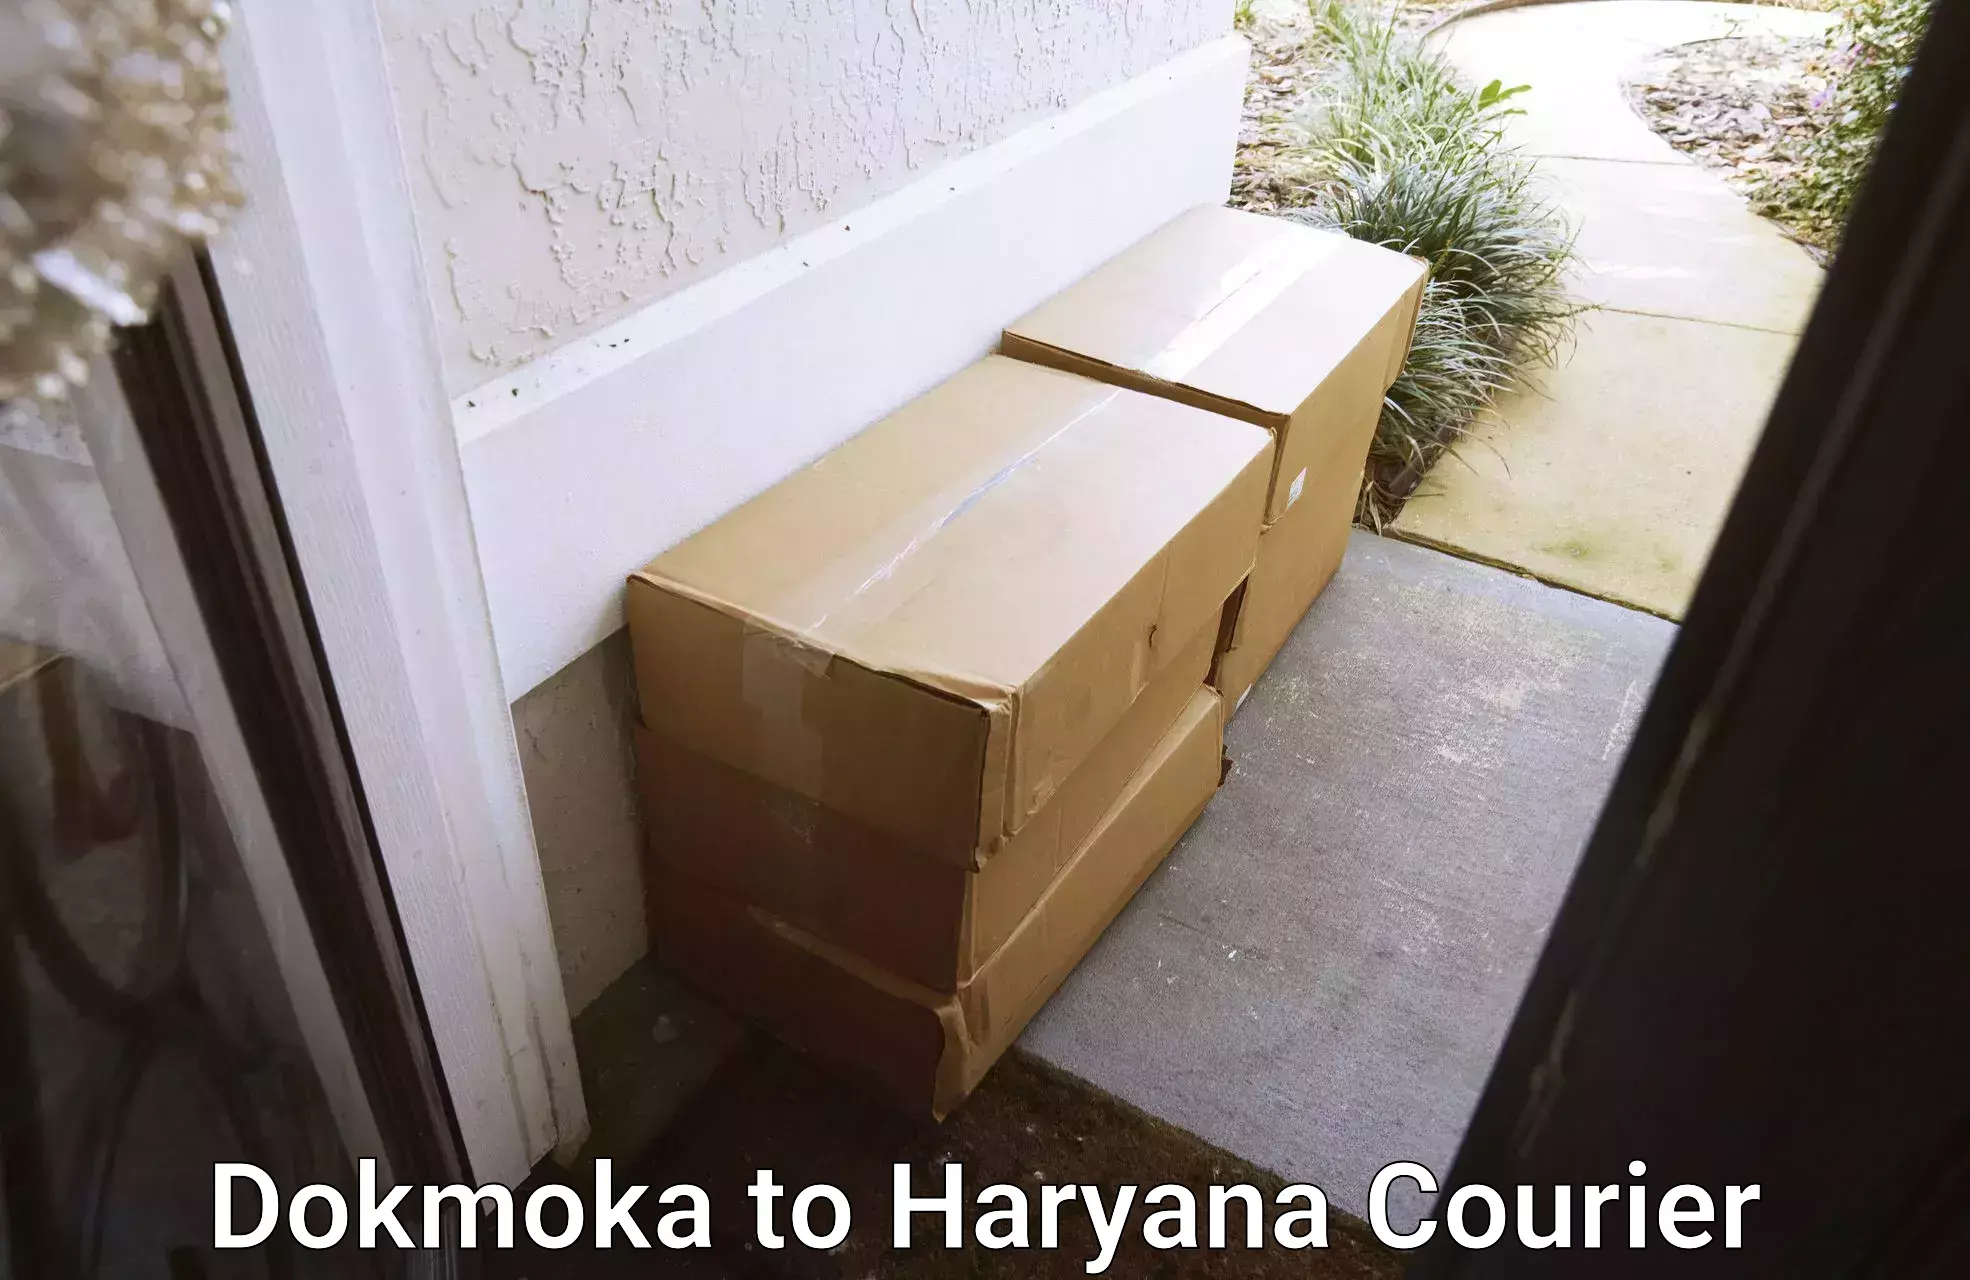 Personal parcel delivery in Dokmoka to Gurugram